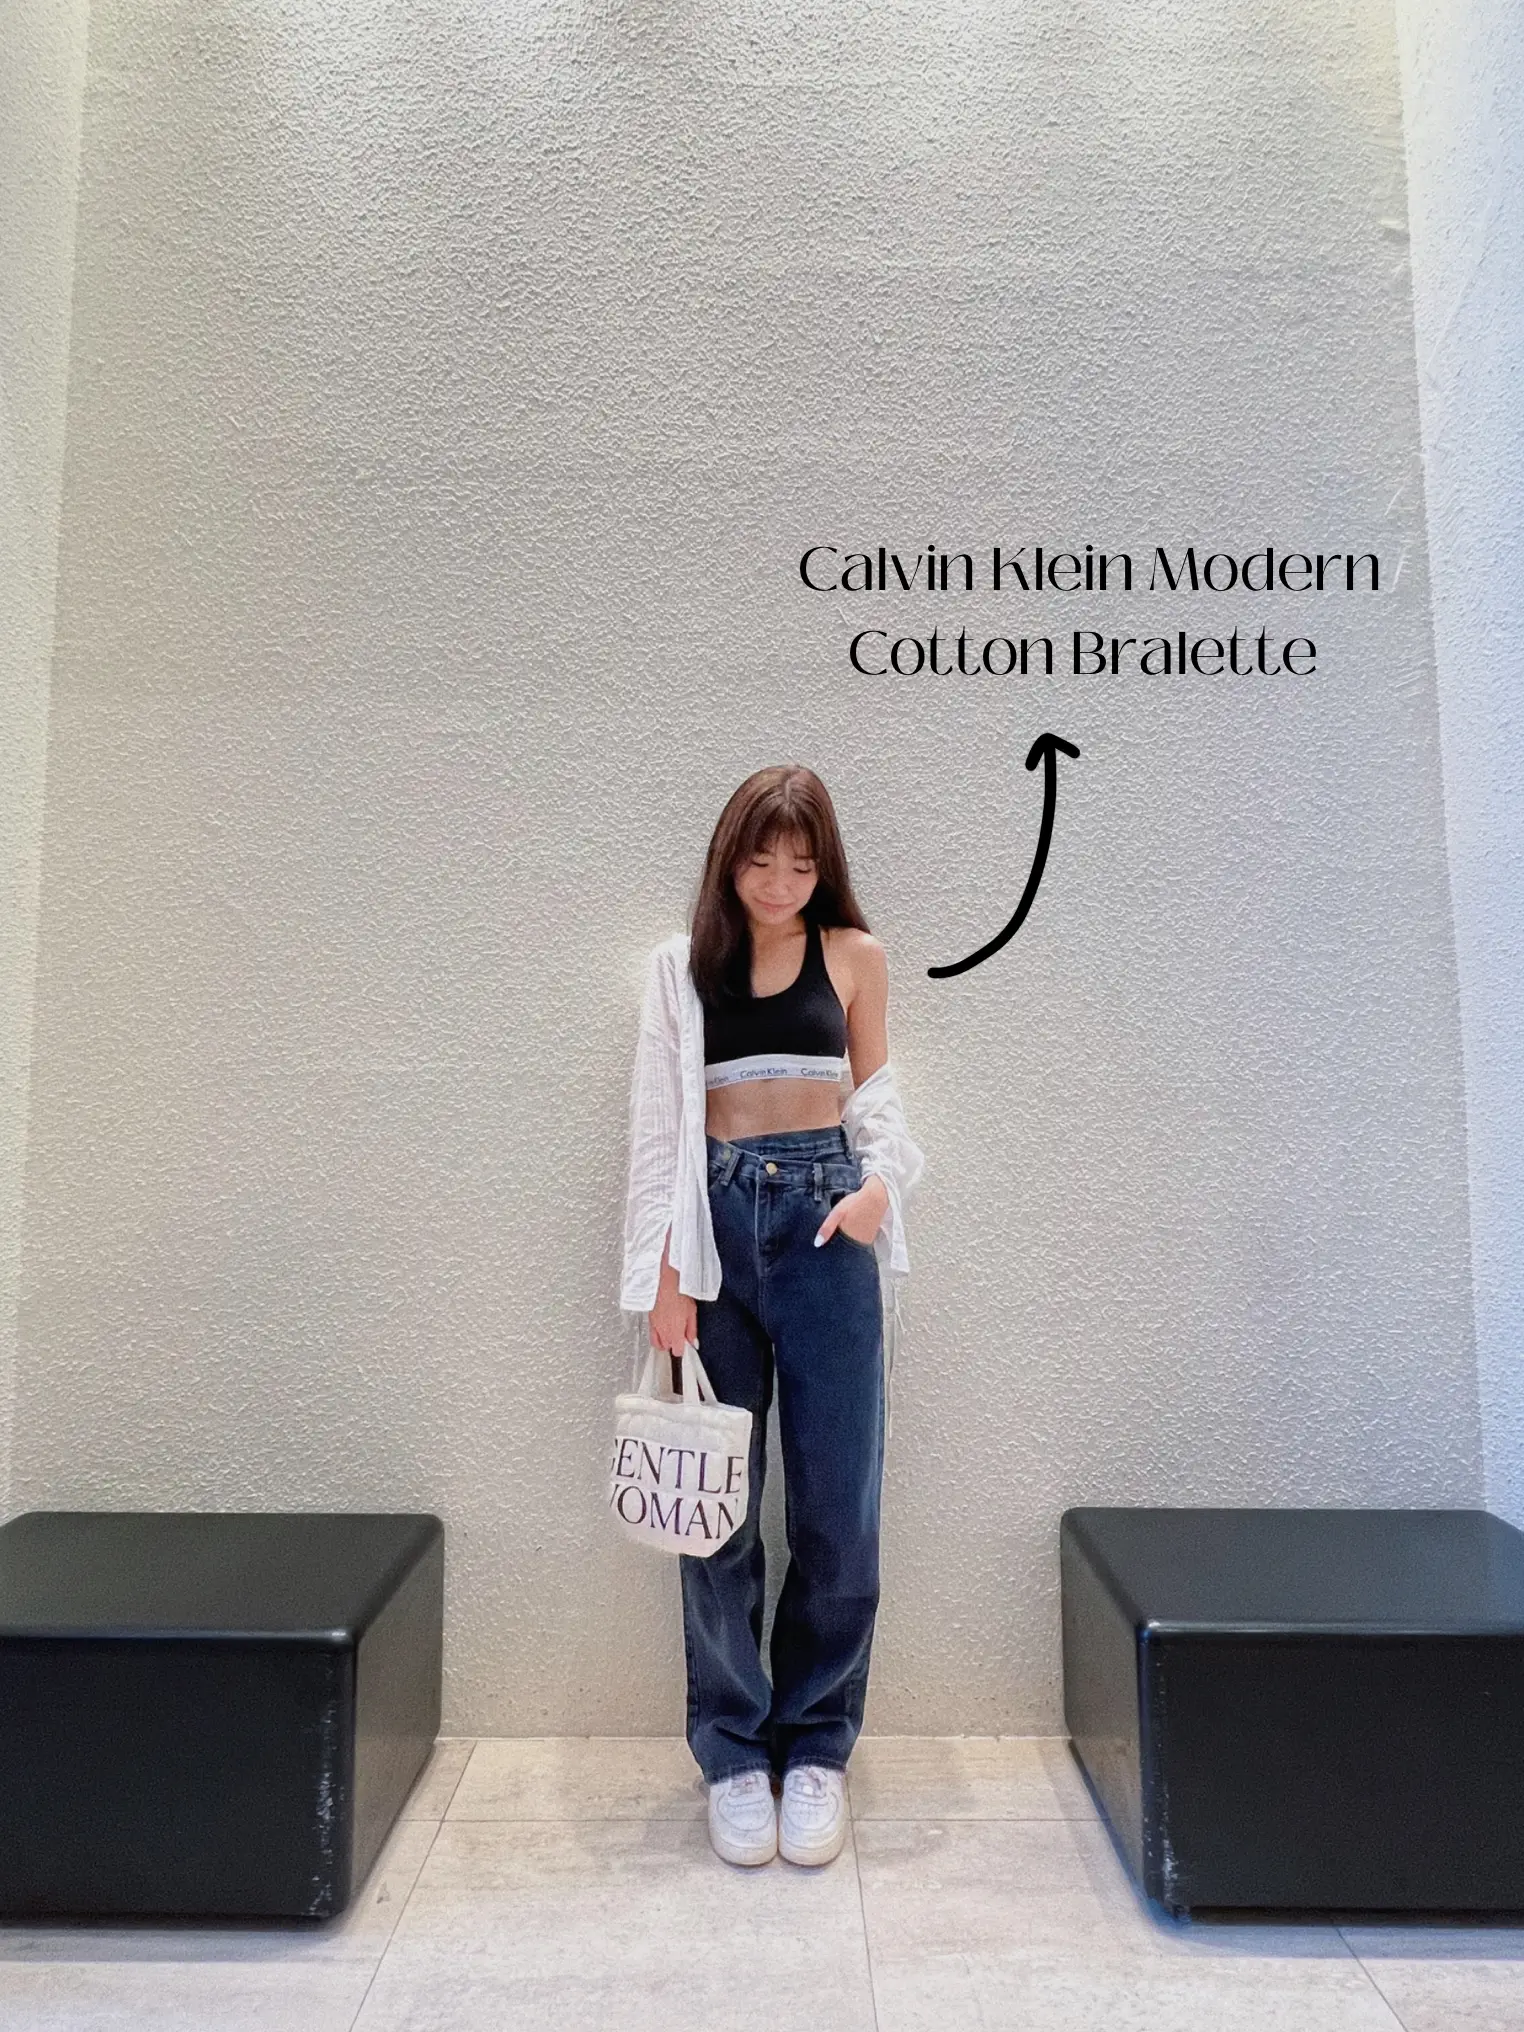 The perfect baggy jeans 👌🏼👌🏼 Museum date ootd!, Gallery posted by  julia ☁️